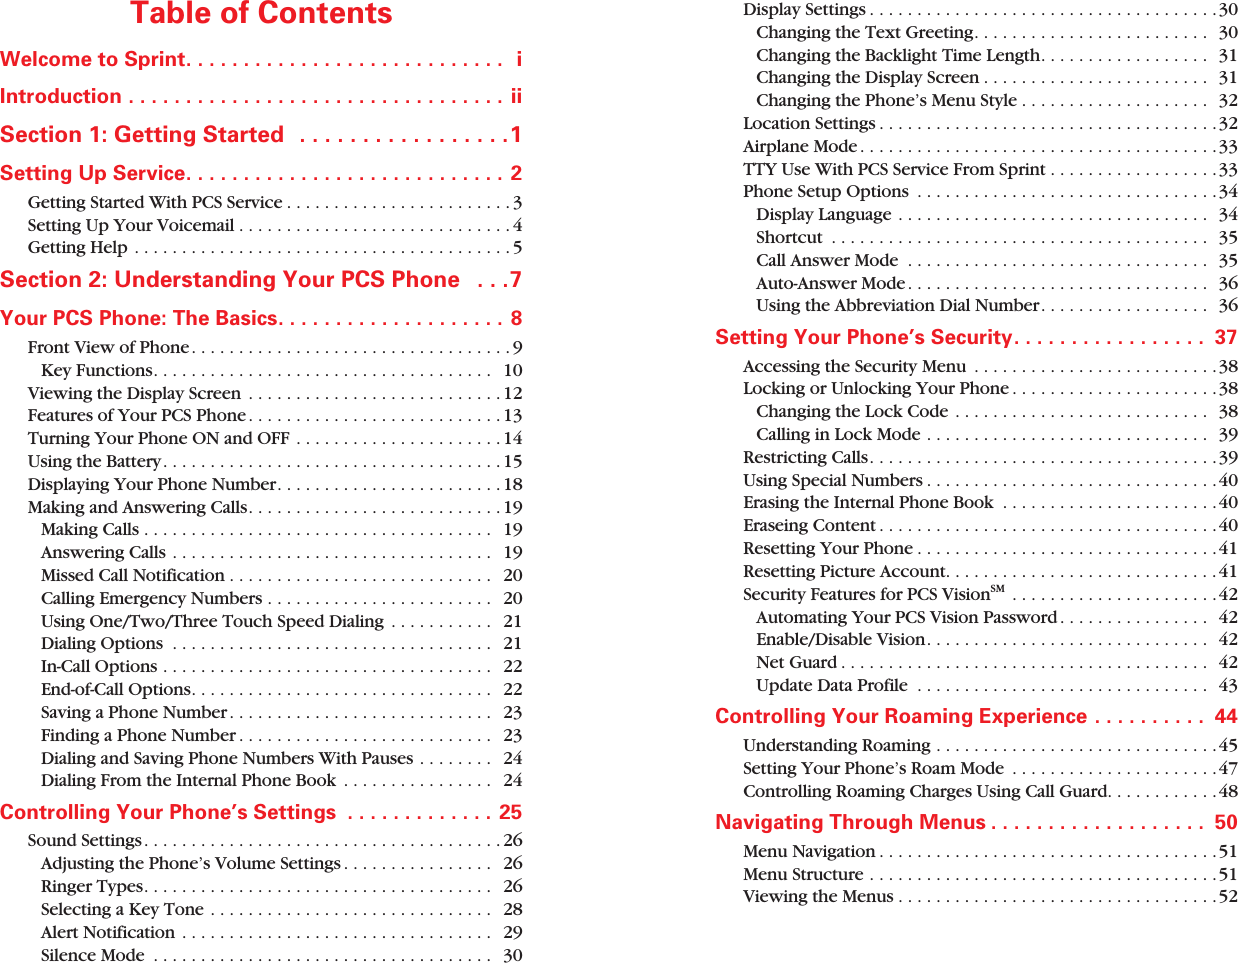  Table of Contents Welcome to Sprint. . . . . . . . . . . . . . . . . . . . . . . . . . . .  iIntroduction . . . . . . . . . . . . . . . . . . . . . . . . . . . . . . . . . ii Section 1: Getting Started   . . . . . . . . . . . . . . . . .1 Setting Up Service. . . . . . . . . . . . . . . . . . . . . . . . . . . .  2 Getting Started With PCS Service . . . . . . . . . . . . . . . . . . . . . . . . 3Setting Up Your Voicemail . . . . . . . . . . . . . . . . . . . . . . . . . . . . . 4Getting Help . . . . . . . . . . . . . . . . . . . . . . . . . . . . . . . . . . . . . . . . 5 Section 2: Understanding Your PCS Phone   . . .7 Your PCS Phone: The Basics. . . . . . . . . . . . . . . . . . . . 8 Front View of Phone. . . . . . . . . . . . . . . . . . . . . . . . . . . . . . . . . . 9Key Functions. . . . . . . . . . . . . . . . . . . . . . . . . . . . . . . . . . . .   10Viewing the Display Screen  . . . . . . . . . . . . . . . . . . . . . . . . . . . 12Features of Your PCS Phone . . . . . . . . . . . . . . . . . . . . . . . . . . . 13Turning Your Phone ON and OFF . . . . . . . . . . . . . . . . . . . . . . 14Using the Battery. . . . . . . . . . . . . . . . . . . . . . . . . . . . . . . . . . . . 15Displaying Your Phone Number. . . . . . . . . . . . . . . . . . . . . . . . 18Making and Answering Calls. . . . . . . . . . . . . . . . . . . . . . . . . . . 19Making Calls . . . . . . . . . . . . . . . . . . . . . . . . . . . . . . . . . . . . .   19Answering Calls . . . . . . . . . . . . . . . . . . . . . . . . . . . . . . . . . .  19Missed Call Notification . . . . . . . . . . . . . . . . . . . . . . . . . . . .   20Calling Emergency Numbers . . . . . . . . . . . . . . . . . . . . . . . .   20Using One/Two/Three Touch Speed Dialing  . . . . . . . . . . .   21Dialing Options  . . . . . . . . . . . . . . . . . . . . . . . . . . . . . . . . . .   21In-Call Options . . . . . . . . . . . . . . . . . . . . . . . . . . . . . . . . . . .   22End-of-Call Options. . . . . . . . . . . . . . . . . . . . . . . . . . . . . . . .   22Saving a Phone Number . . . . . . . . . . . . . . . . . . . . . . . . . . . .   23Finding a Phone Number . . . . . . . . . . . . . . . . . . . . . . . . . . .   23Dialing and Saving Phone Numbers With Pauses . . . . . . . .   24Dialing From the Internal Phone Book  . . . . . . . . . . . . . . . .   24 Controlling Your Phone’s Settings  . . . . . . . . . . . . . 25 Sound Settings. . . . . . . . . . . . . . . . . . . . . . . . . . . . . . . . . . . . . . 26Adjusting the Phone’s Volume Settings . . . . . . . . . . . . . . . .   26Ringer Types. . . . . . . . . . . . . . . . . . . . . . . . . . . . . . . . . . . . .   26Selecting a Key Tone . . . . . . . . . . . . . . . . . . . . . . . . . . . . . .   28Alert Notification . . . . . . . . . . . . . . . . . . . . . . . . . . . . . . . . .  29Silence Mode  . . . . . . . . . . . . . . . . . . . . . . . . . . . . . . . . . . . .   30Display Settings . . . . . . . . . . . . . . . . . . . . . . . . . . . . . . . . . . . . .30Changing the Text Greeting. . . . . . . . . . . . . . . . . . . . . . . . .  30Changing the Backlight Time Length. . . . . . . . . . . . . . . . . .  31Changing the Display Screen . . . . . . . . . . . . . . . . . . . . . . . .  31Changing the Phone’s Menu Style . . . . . . . . . . . . . . . . . . . .  32Location Settings . . . . . . . . . . . . . . . . . . . . . . . . . . . . . . . . . . . .32Airplane Mode . . . . . . . . . . . . . . . . . . . . . . . . . . . . . . . . . . . . . .33TTY Use With PCS Service From Sprint . . . . . . . . . . . . . . . . . .33Phone Setup Options  . . . . . . . . . . . . . . . . . . . . . . . . . . . . . . . .34Display Language . . . . . . . . . . . . . . . . . . . . . . . . . . . . . . . . .   34Shortcut  . . . . . . . . . . . . . . . . . . . . . . . . . . . . . . . . . . . . . . . .  35Call Answer Mode  . . . . . . . . . . . . . . . . . . . . . . . . . . . . . . . .  35Auto-Answer Mode . . . . . . . . . . . . . . . . . . . . . . . . . . . . . . . .  36Using the Abbreviation Dial Number. . . . . . . . . . . . . . . . . .  36 Setting Your Phone’s Security. . . . . . . . . . . . . . . . .  37 Accessing the Security Menu  . . . . . . . . . . . . . . . . . . . . . . . . . .38Locking or Unlocking Your Phone . . . . . . . . . . . . . . . . . . . . . .38Changing the Lock Code . . . . . . . . . . . . . . . . . . . . . . . . . . .  38Calling in Lock Mode . . . . . . . . . . . . . . . . . . . . . . . . . . . . . .  39Restricting Calls. . . . . . . . . . . . . . . . . . . . . . . . . . . . . . . . . . . . .39Using Special Numbers . . . . . . . . . . . . . . . . . . . . . . . . . . . . . . .40Erasing the Internal Phone Book  . . . . . . . . . . . . . . . . . . . . . . .40Eraseing Content . . . . . . . . . . . . . . . . . . . . . . . . . . . . . . . . . . . .40Resetting Your Phone . . . . . . . . . . . . . . . . . . . . . . . . . . . . . . . .41Resetting Picture Account. . . . . . . . . . . . . . . . . . . . . . . . . . . . .41 Security Features for PCS Vision SM  . . . . . . . . . . . . . . . . . . . . . .42Automating Your PCS Vision Password . . . . . . . . . . . . . . . .  42Enable/Disable Vision. . . . . . . . . . . . . . . . . . . . . . . . . . . . . .  42Net Guard . . . . . . . . . . . . . . . . . . . . . . . . . . . . . . . . . . . . . . .  42Update Data Profile  . . . . . . . . . . . . . . . . . . . . . . . . . . . . . . .  43 Controlling Your Roaming Experience . . . . . . . . . .  44 Understanding Roaming . . . . . . . . . . . . . . . . . . . . . . . . . . . . . .45Setting Your Phone’s Roam Mode  . . . . . . . . . . . . . . . . . . . . . . 47Controlling Roaming Charges Using Call Guard. . . . . . . . . . . .48 Navigating Through Menus . . . . . . . . . . . . . . . . . . .  50 Menu Navigation . . . . . . . . . . . . . . . . . . . . . . . . . . . . . . . . . . . .51Menu Structure . . . . . . . . . . . . . . . . . . . . . . . . . . . . . . . . . . . . . 51Viewing the Menus . . . . . . . . . . . . . . . . . . . . . . . . . . . . . . . . . .52